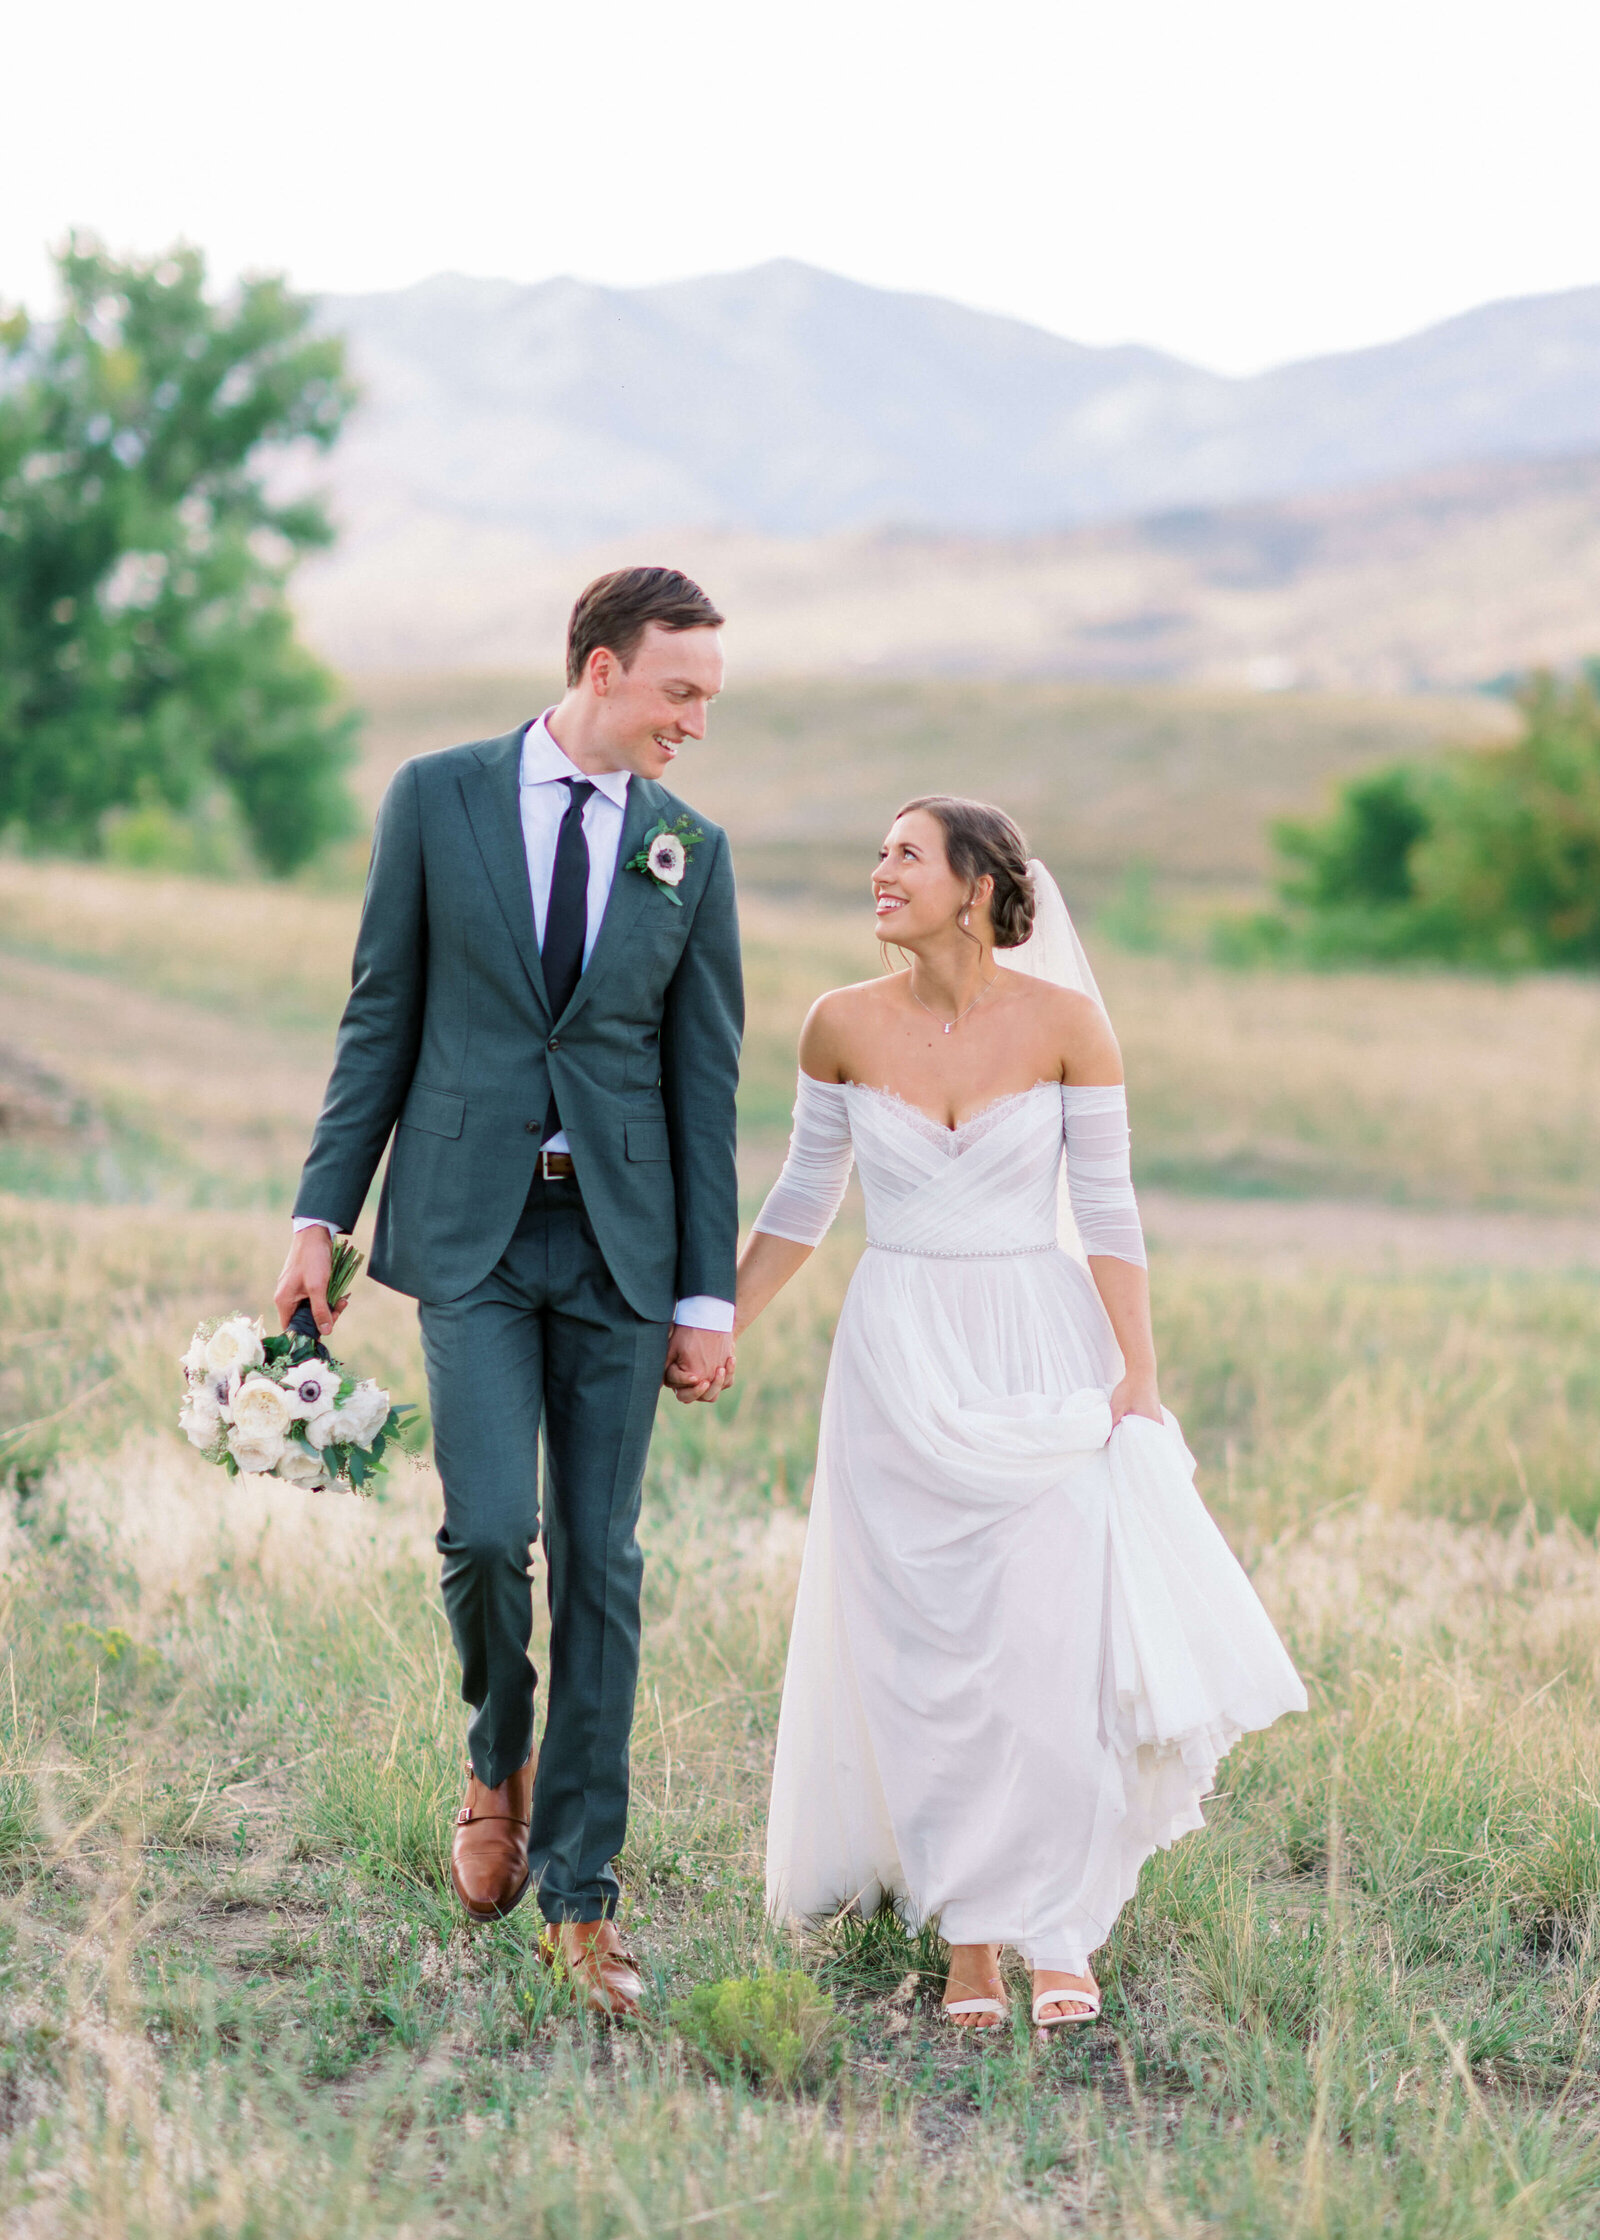 Newly married couple walk in a field together while staring into each other's eyes in an image by Virginia Wedding Photographer